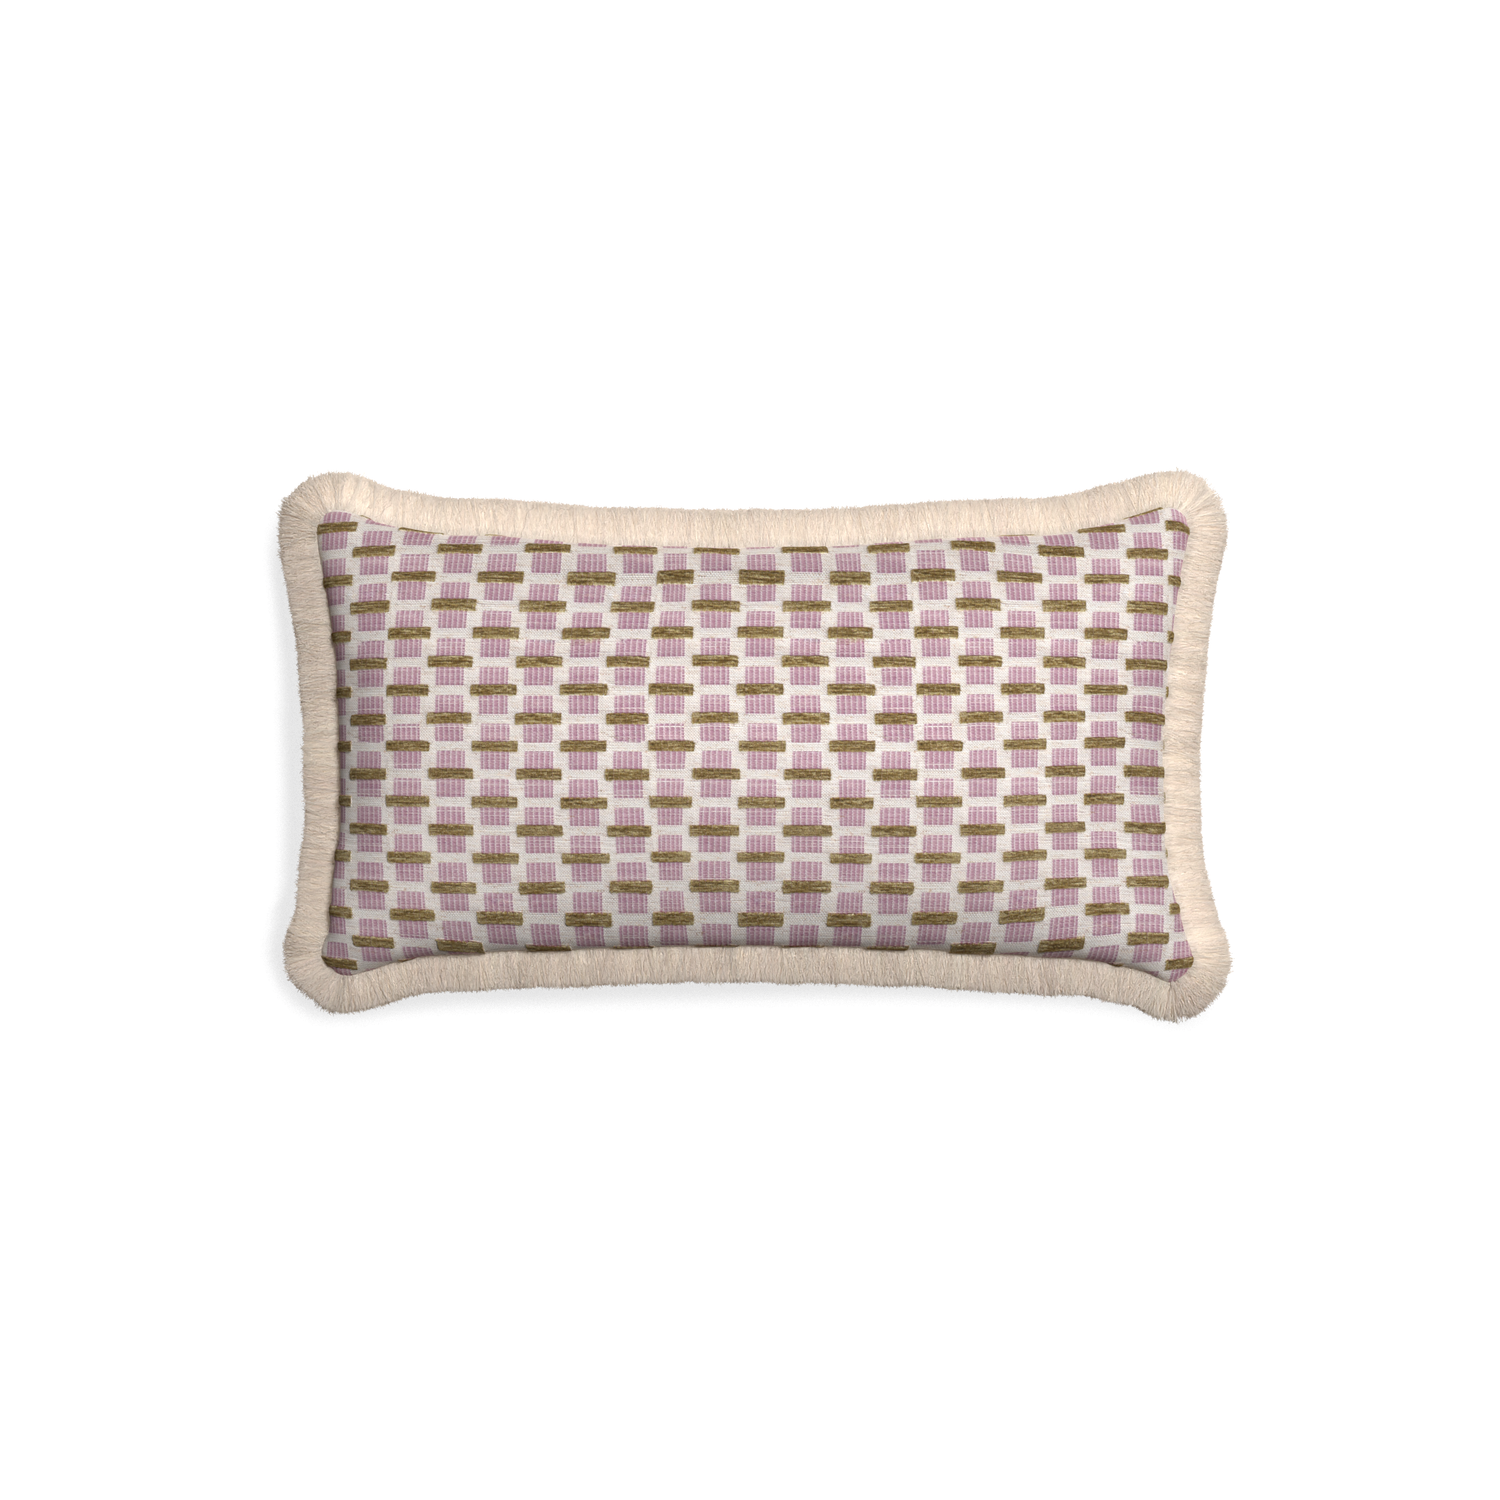 Petite-lumbar willow orchid custom pink geometric chenillepillow with cream fringe on white background